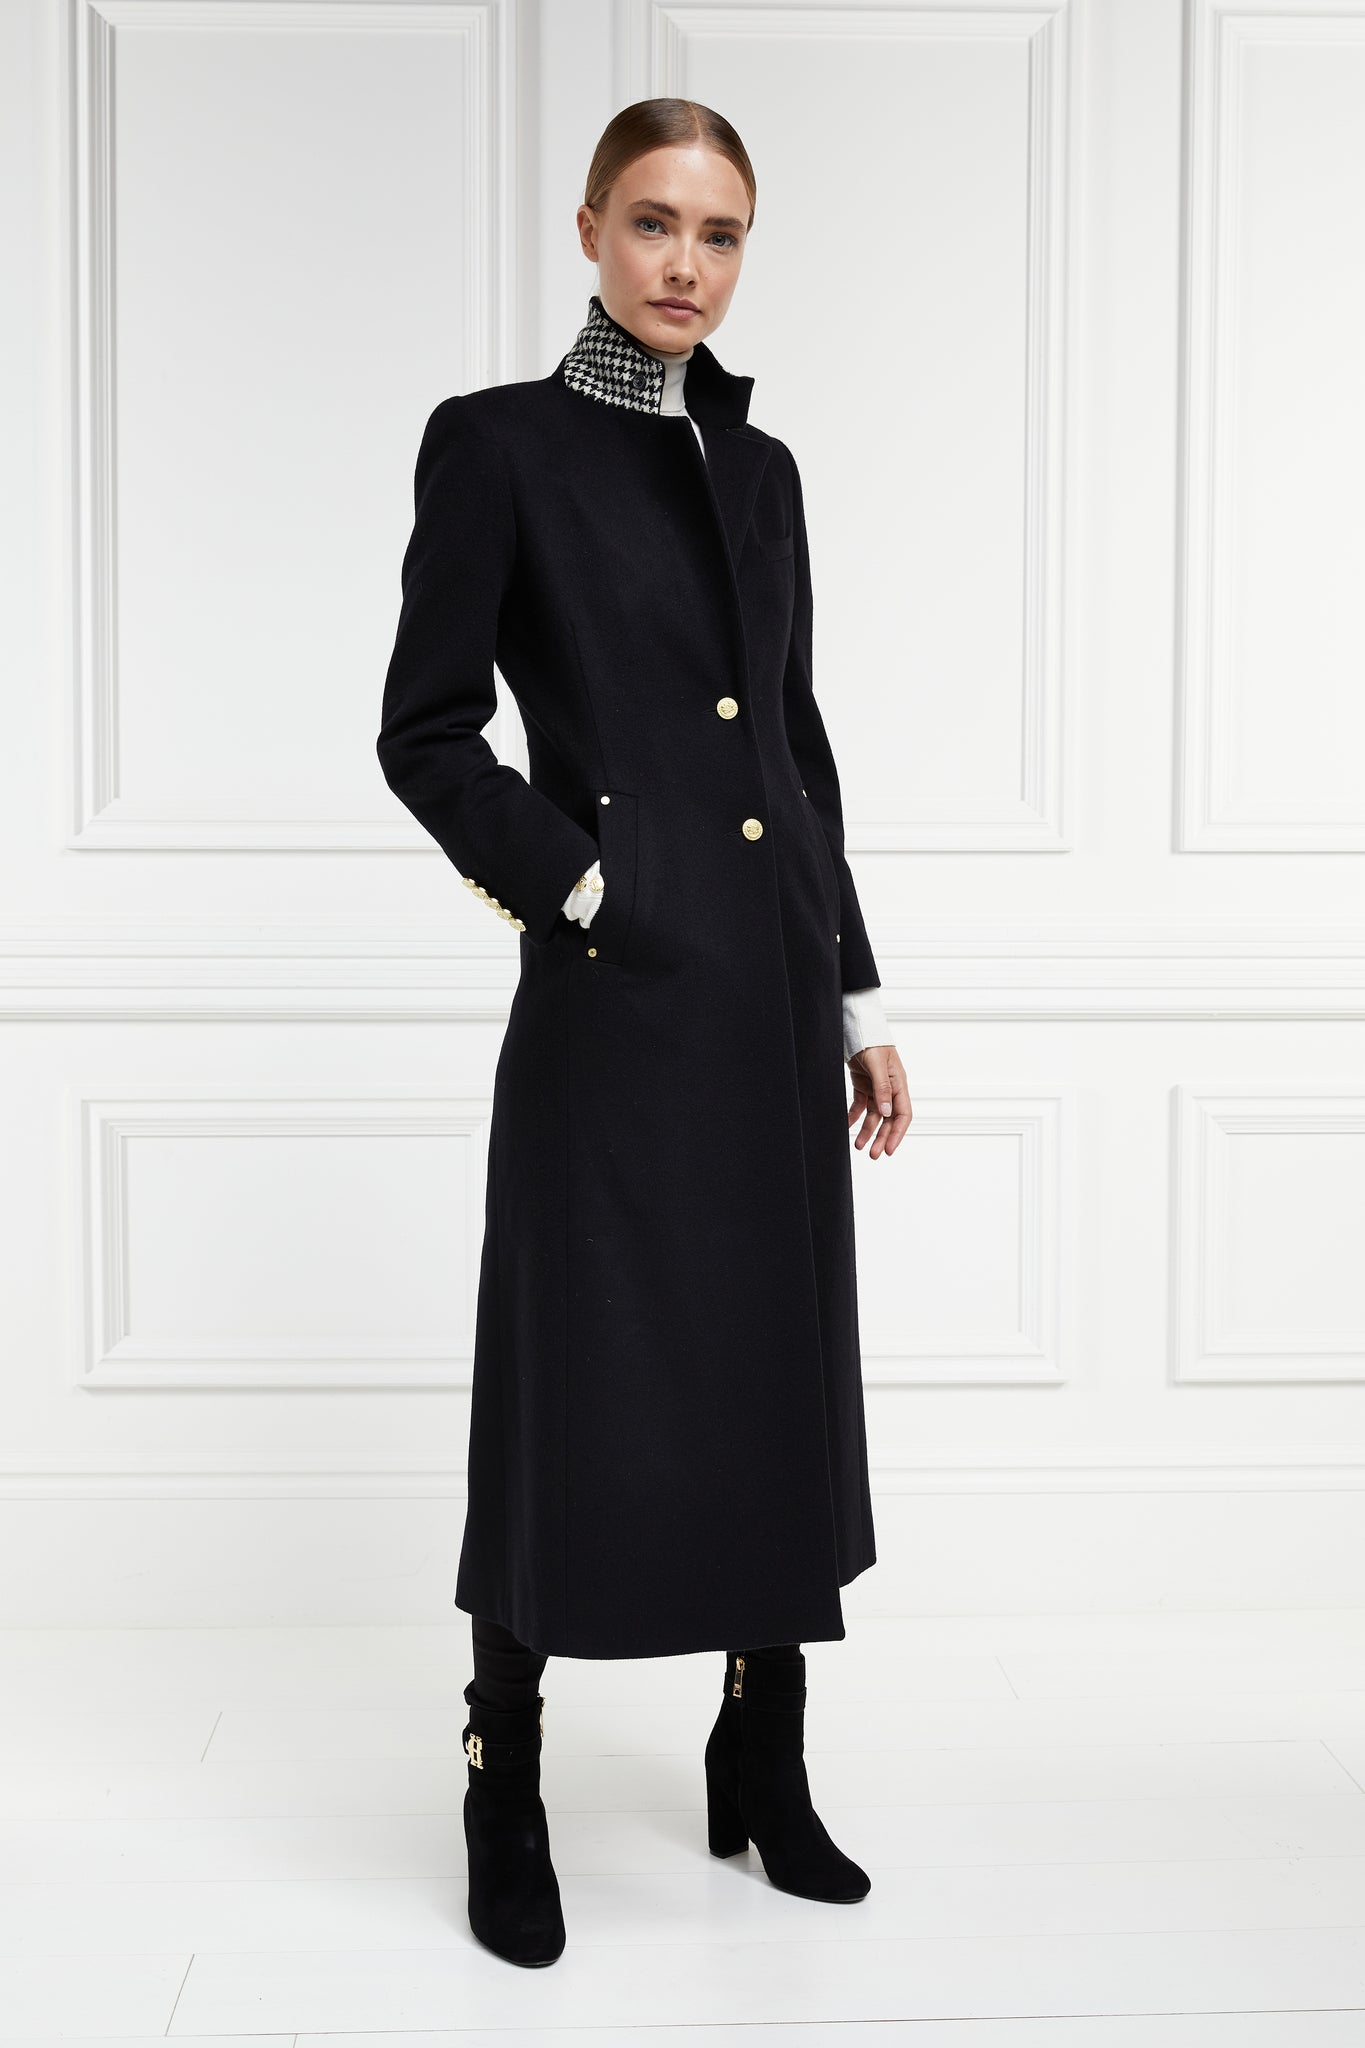 black single breasted full length wool coat with black and white houndstooth collar detail